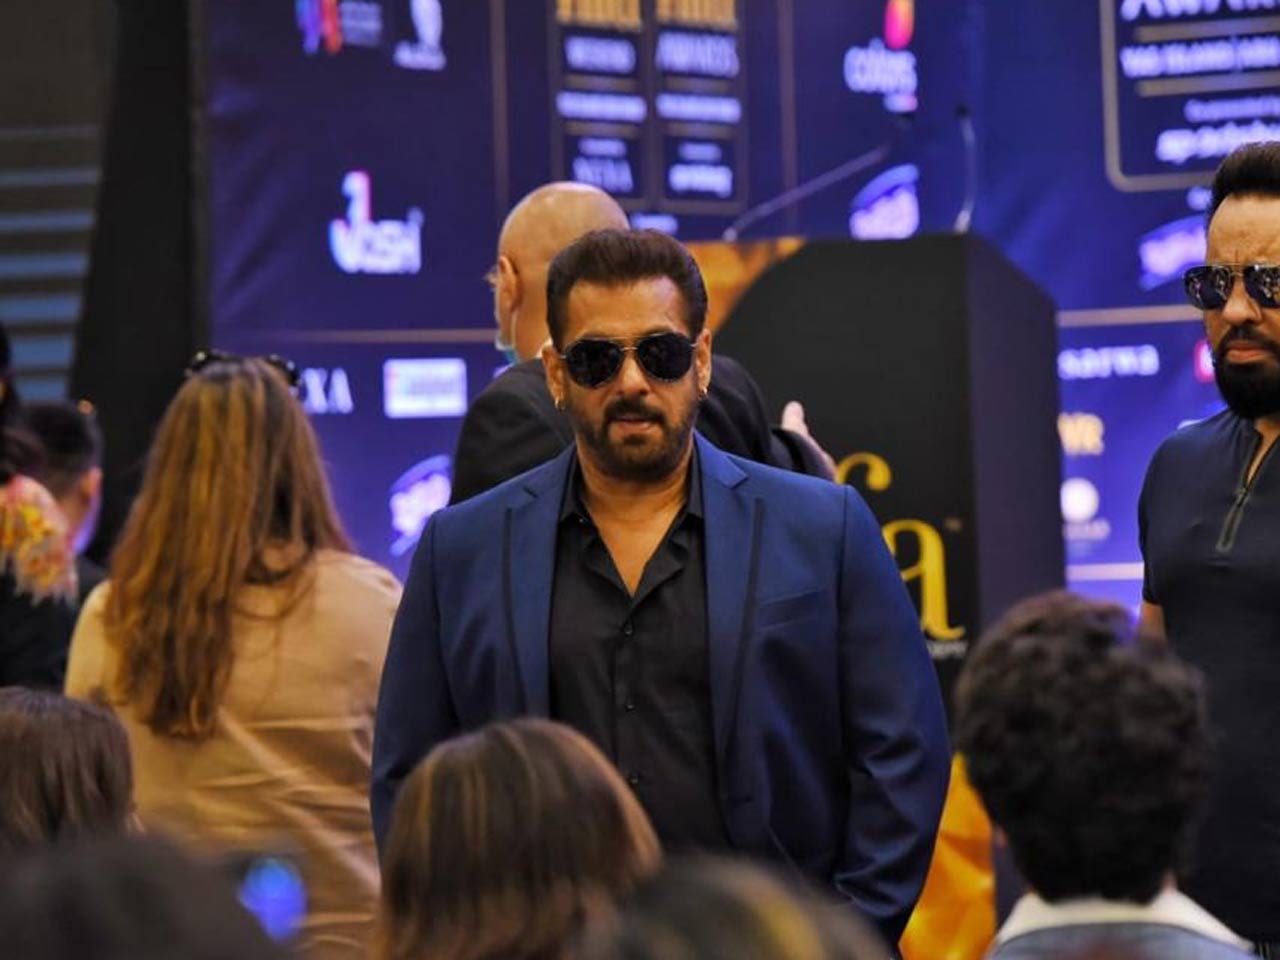 The man himself, Salman Khan, looks dapper in a blue suit and strikes a stylish pose. It has been a while since he performed or even attended an award ceremony and fans are likely to be excited